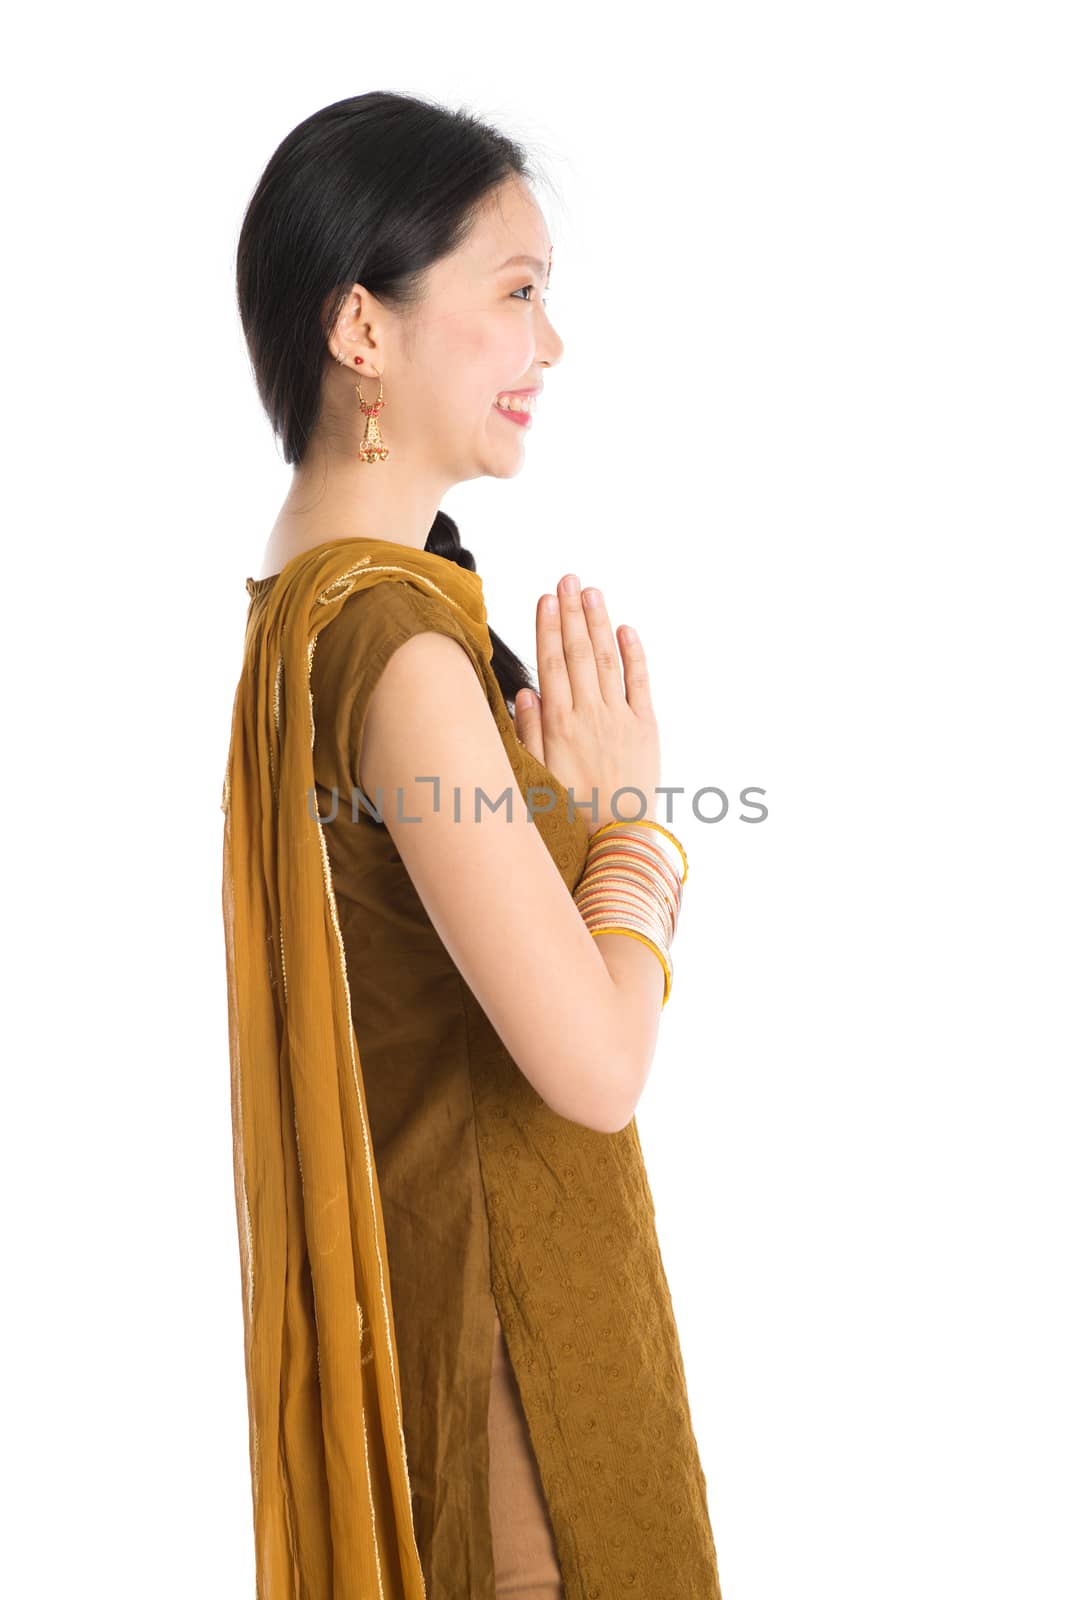 Young girl in Punjabi clothes greeting. by szefei